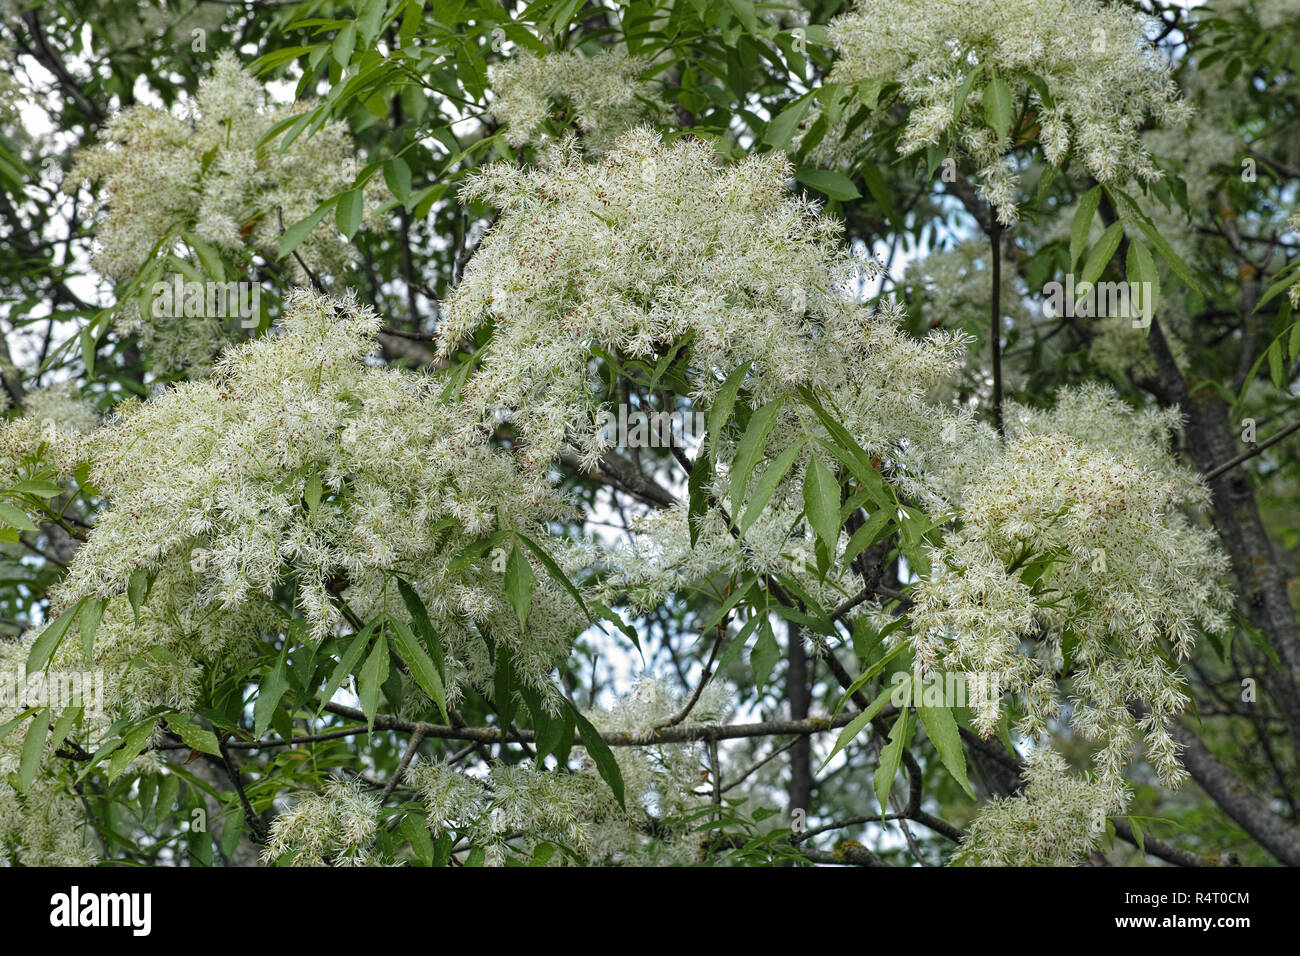 manna ash, south european flowering ash,inflorescences and leaves Stock Photo